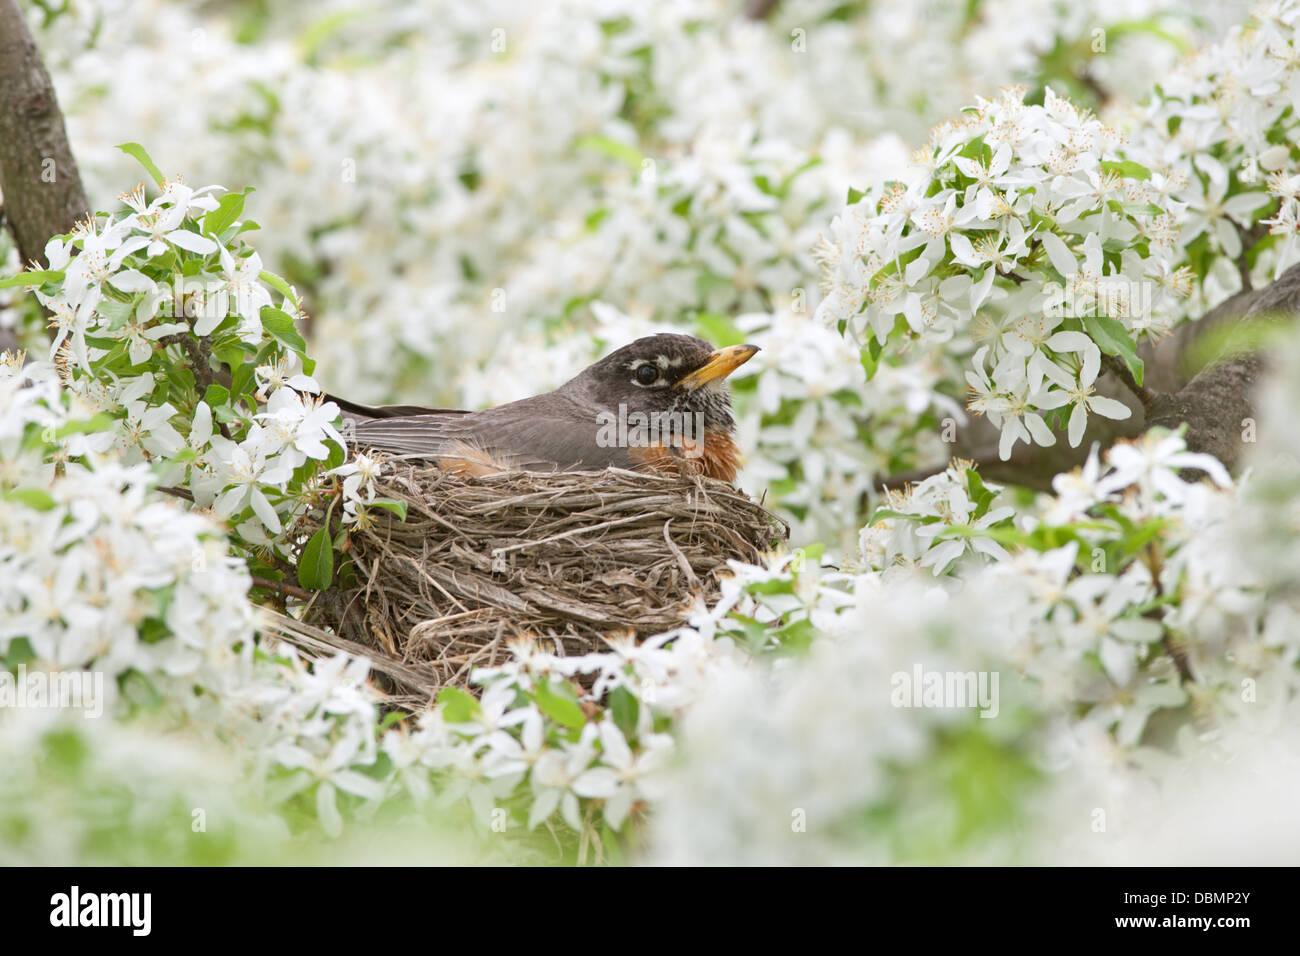 American Robin incubating Nest in Crabapple Blossoms perching bird songbird Ornithology Science Nature Wildlife Environment Stock Photo